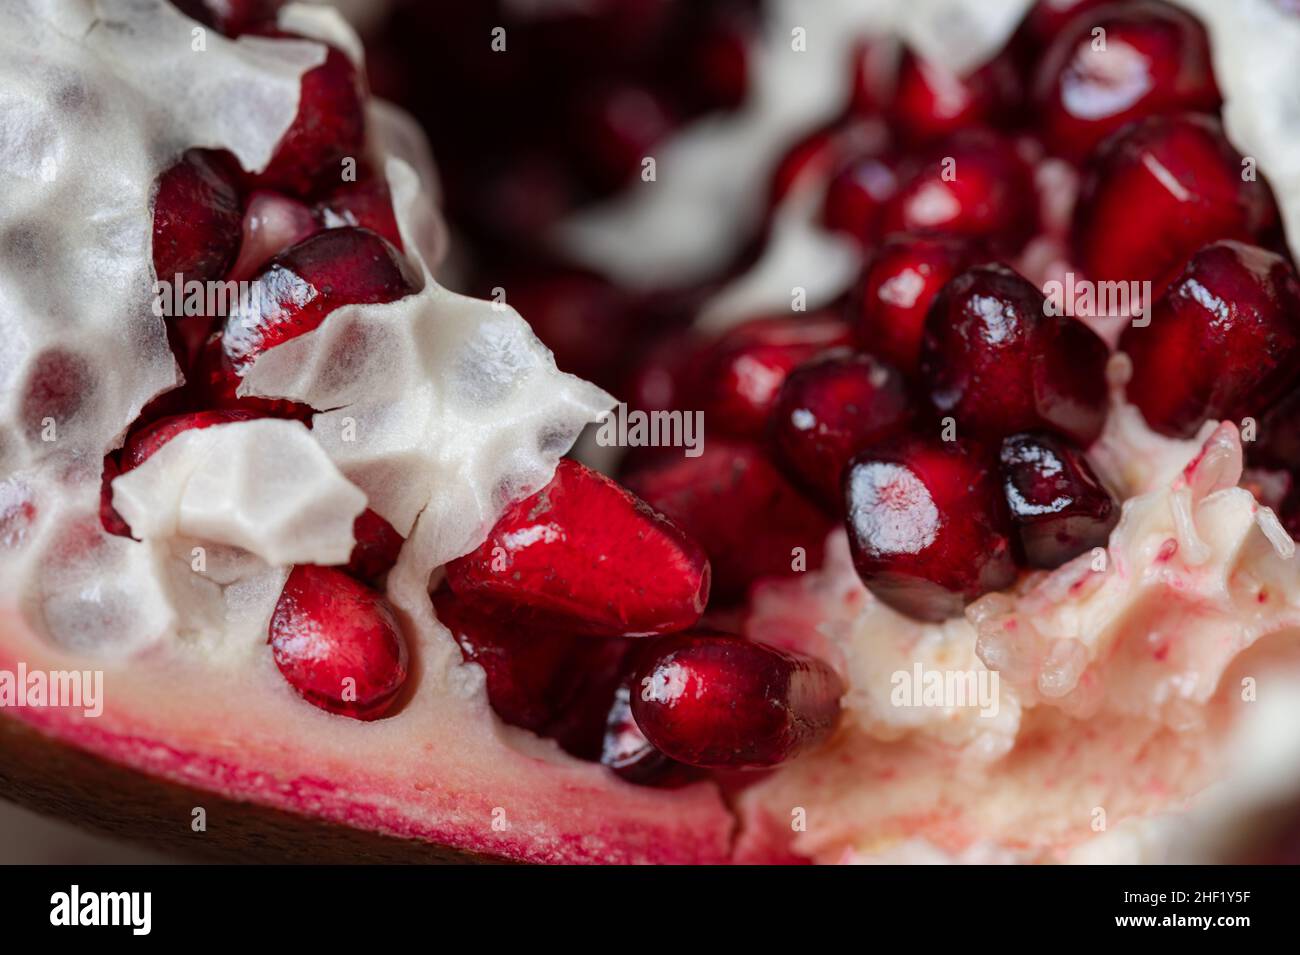 Close Up of a cracked open Pomegranate with seeds and pulp Stock Photo